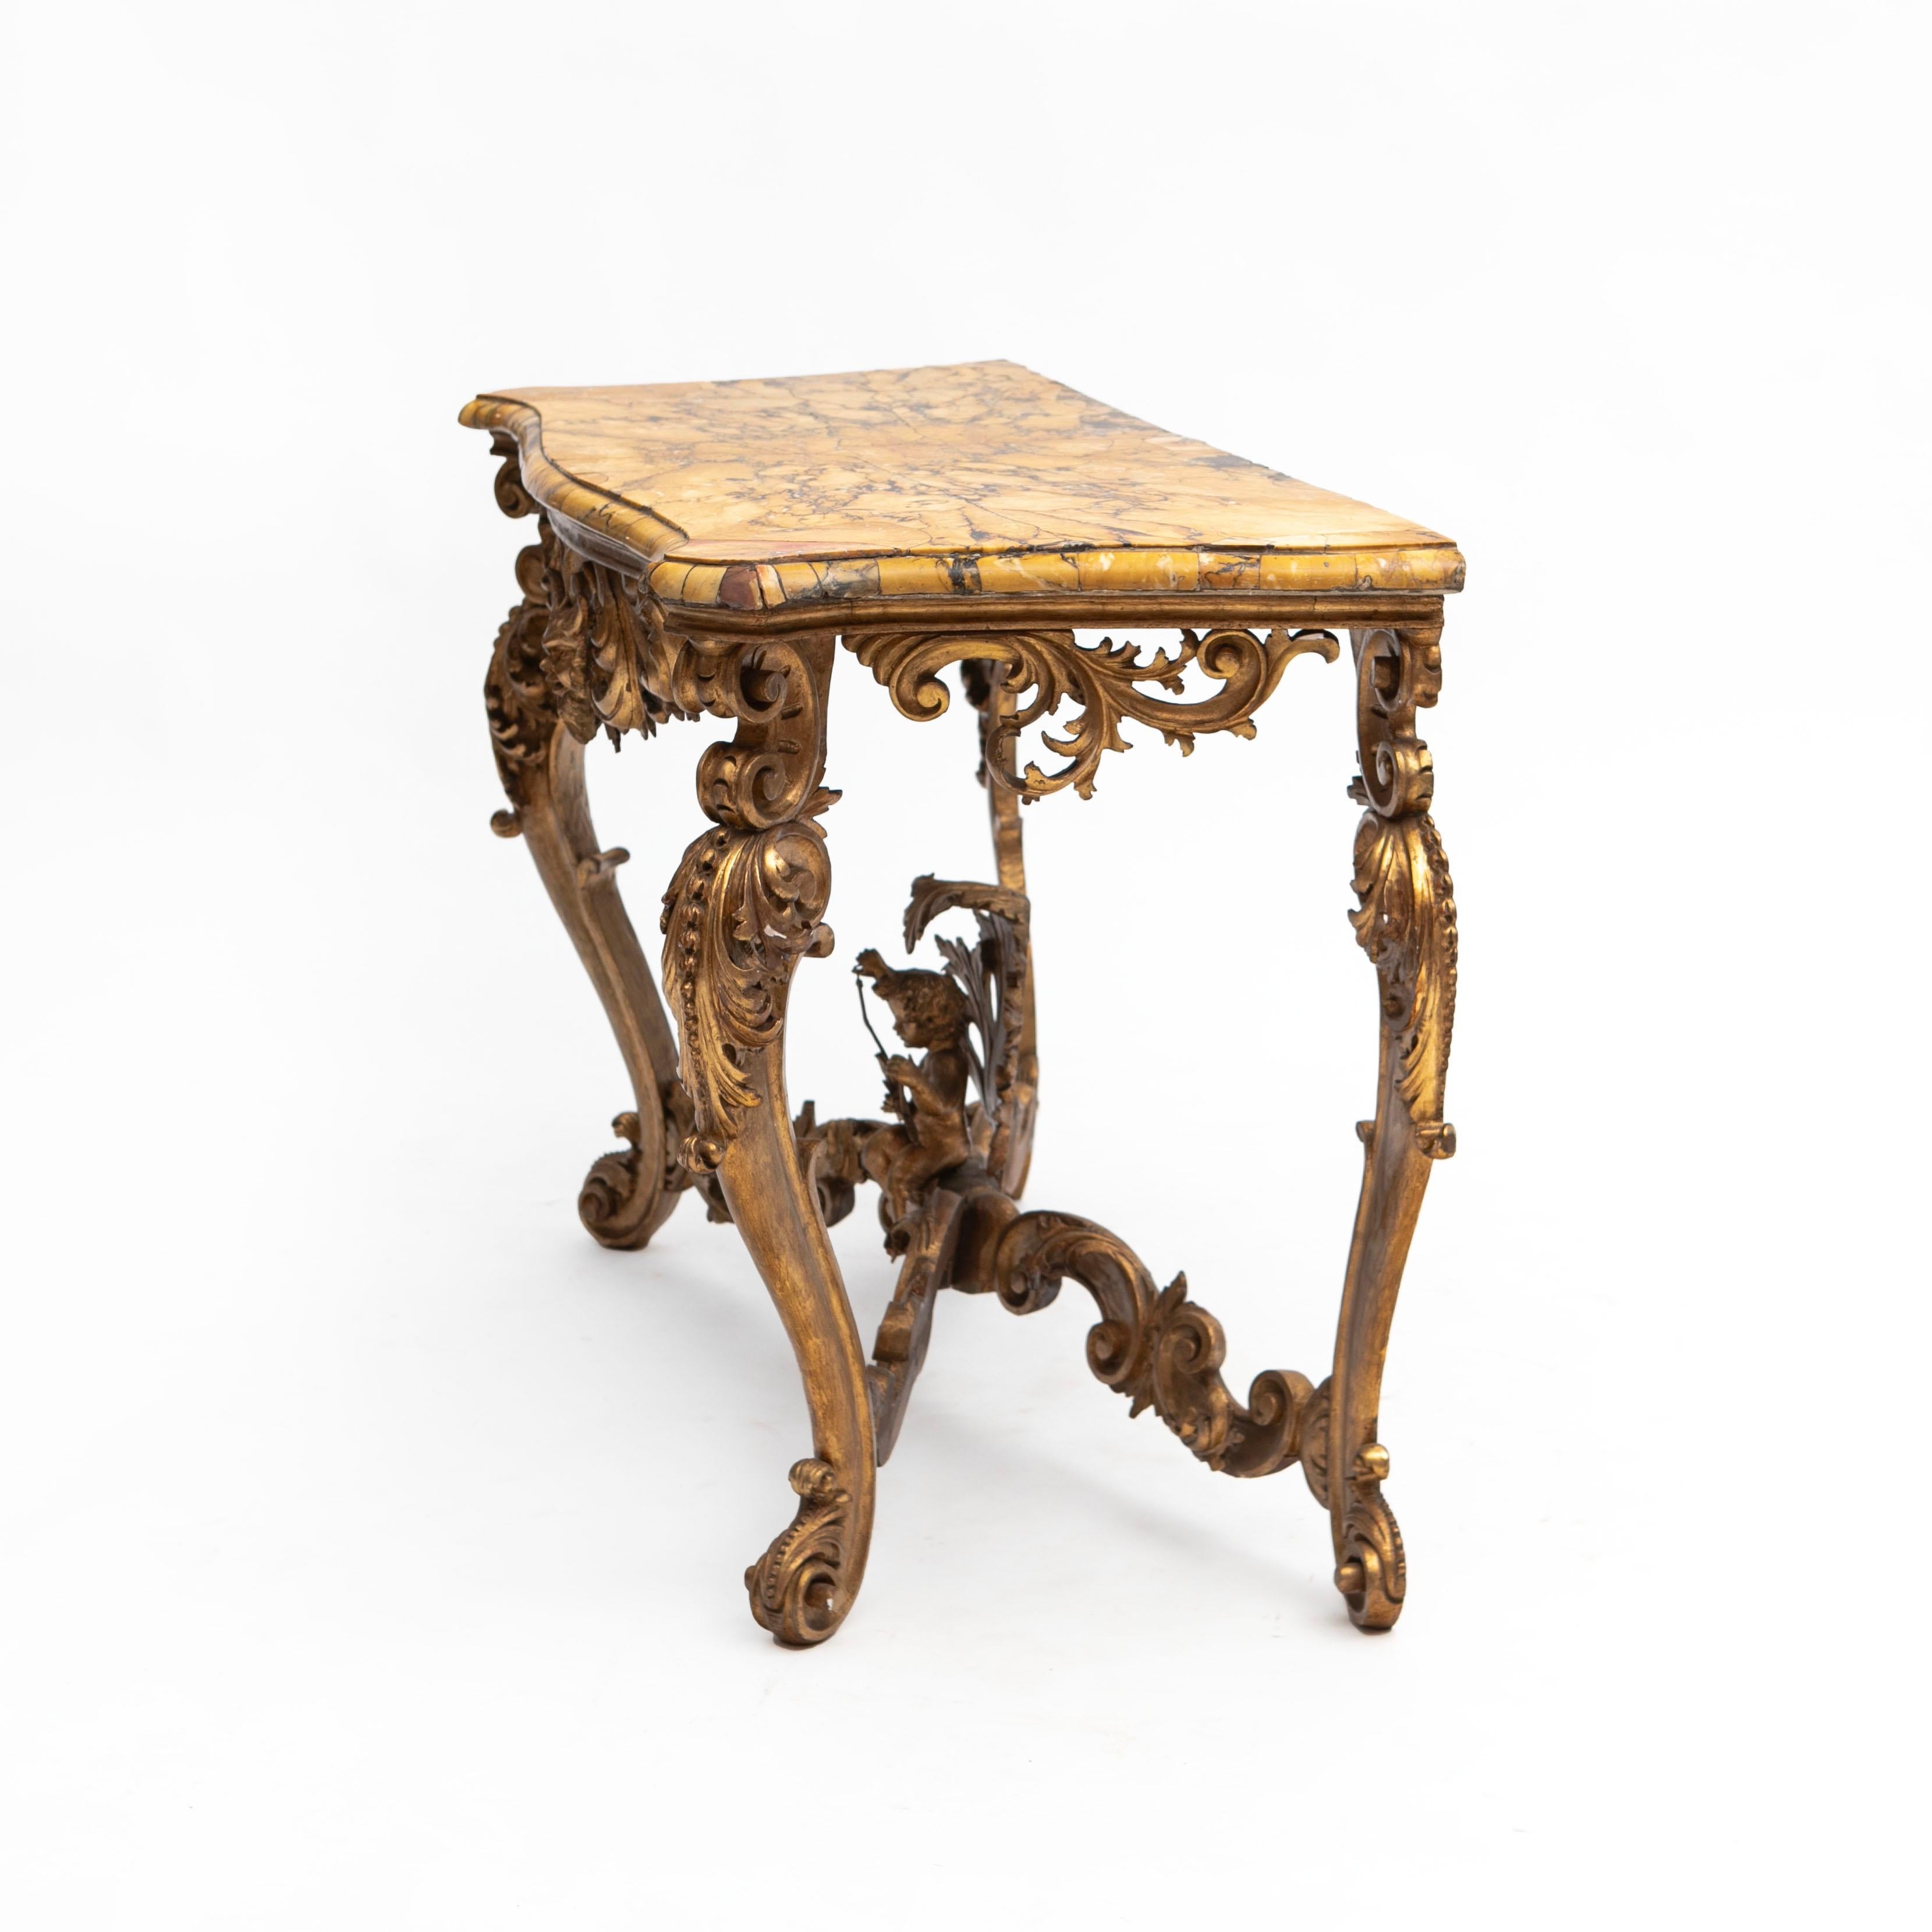 Italian 19th Century giltwood and Breche D’Alep marble console table.
Richly hand-carved gilt wood in the form of masquerades, acanthus leafs, etc.
Stunning Breche D'Alep marble top, inlaid in fragments, giving the table top an stunning and